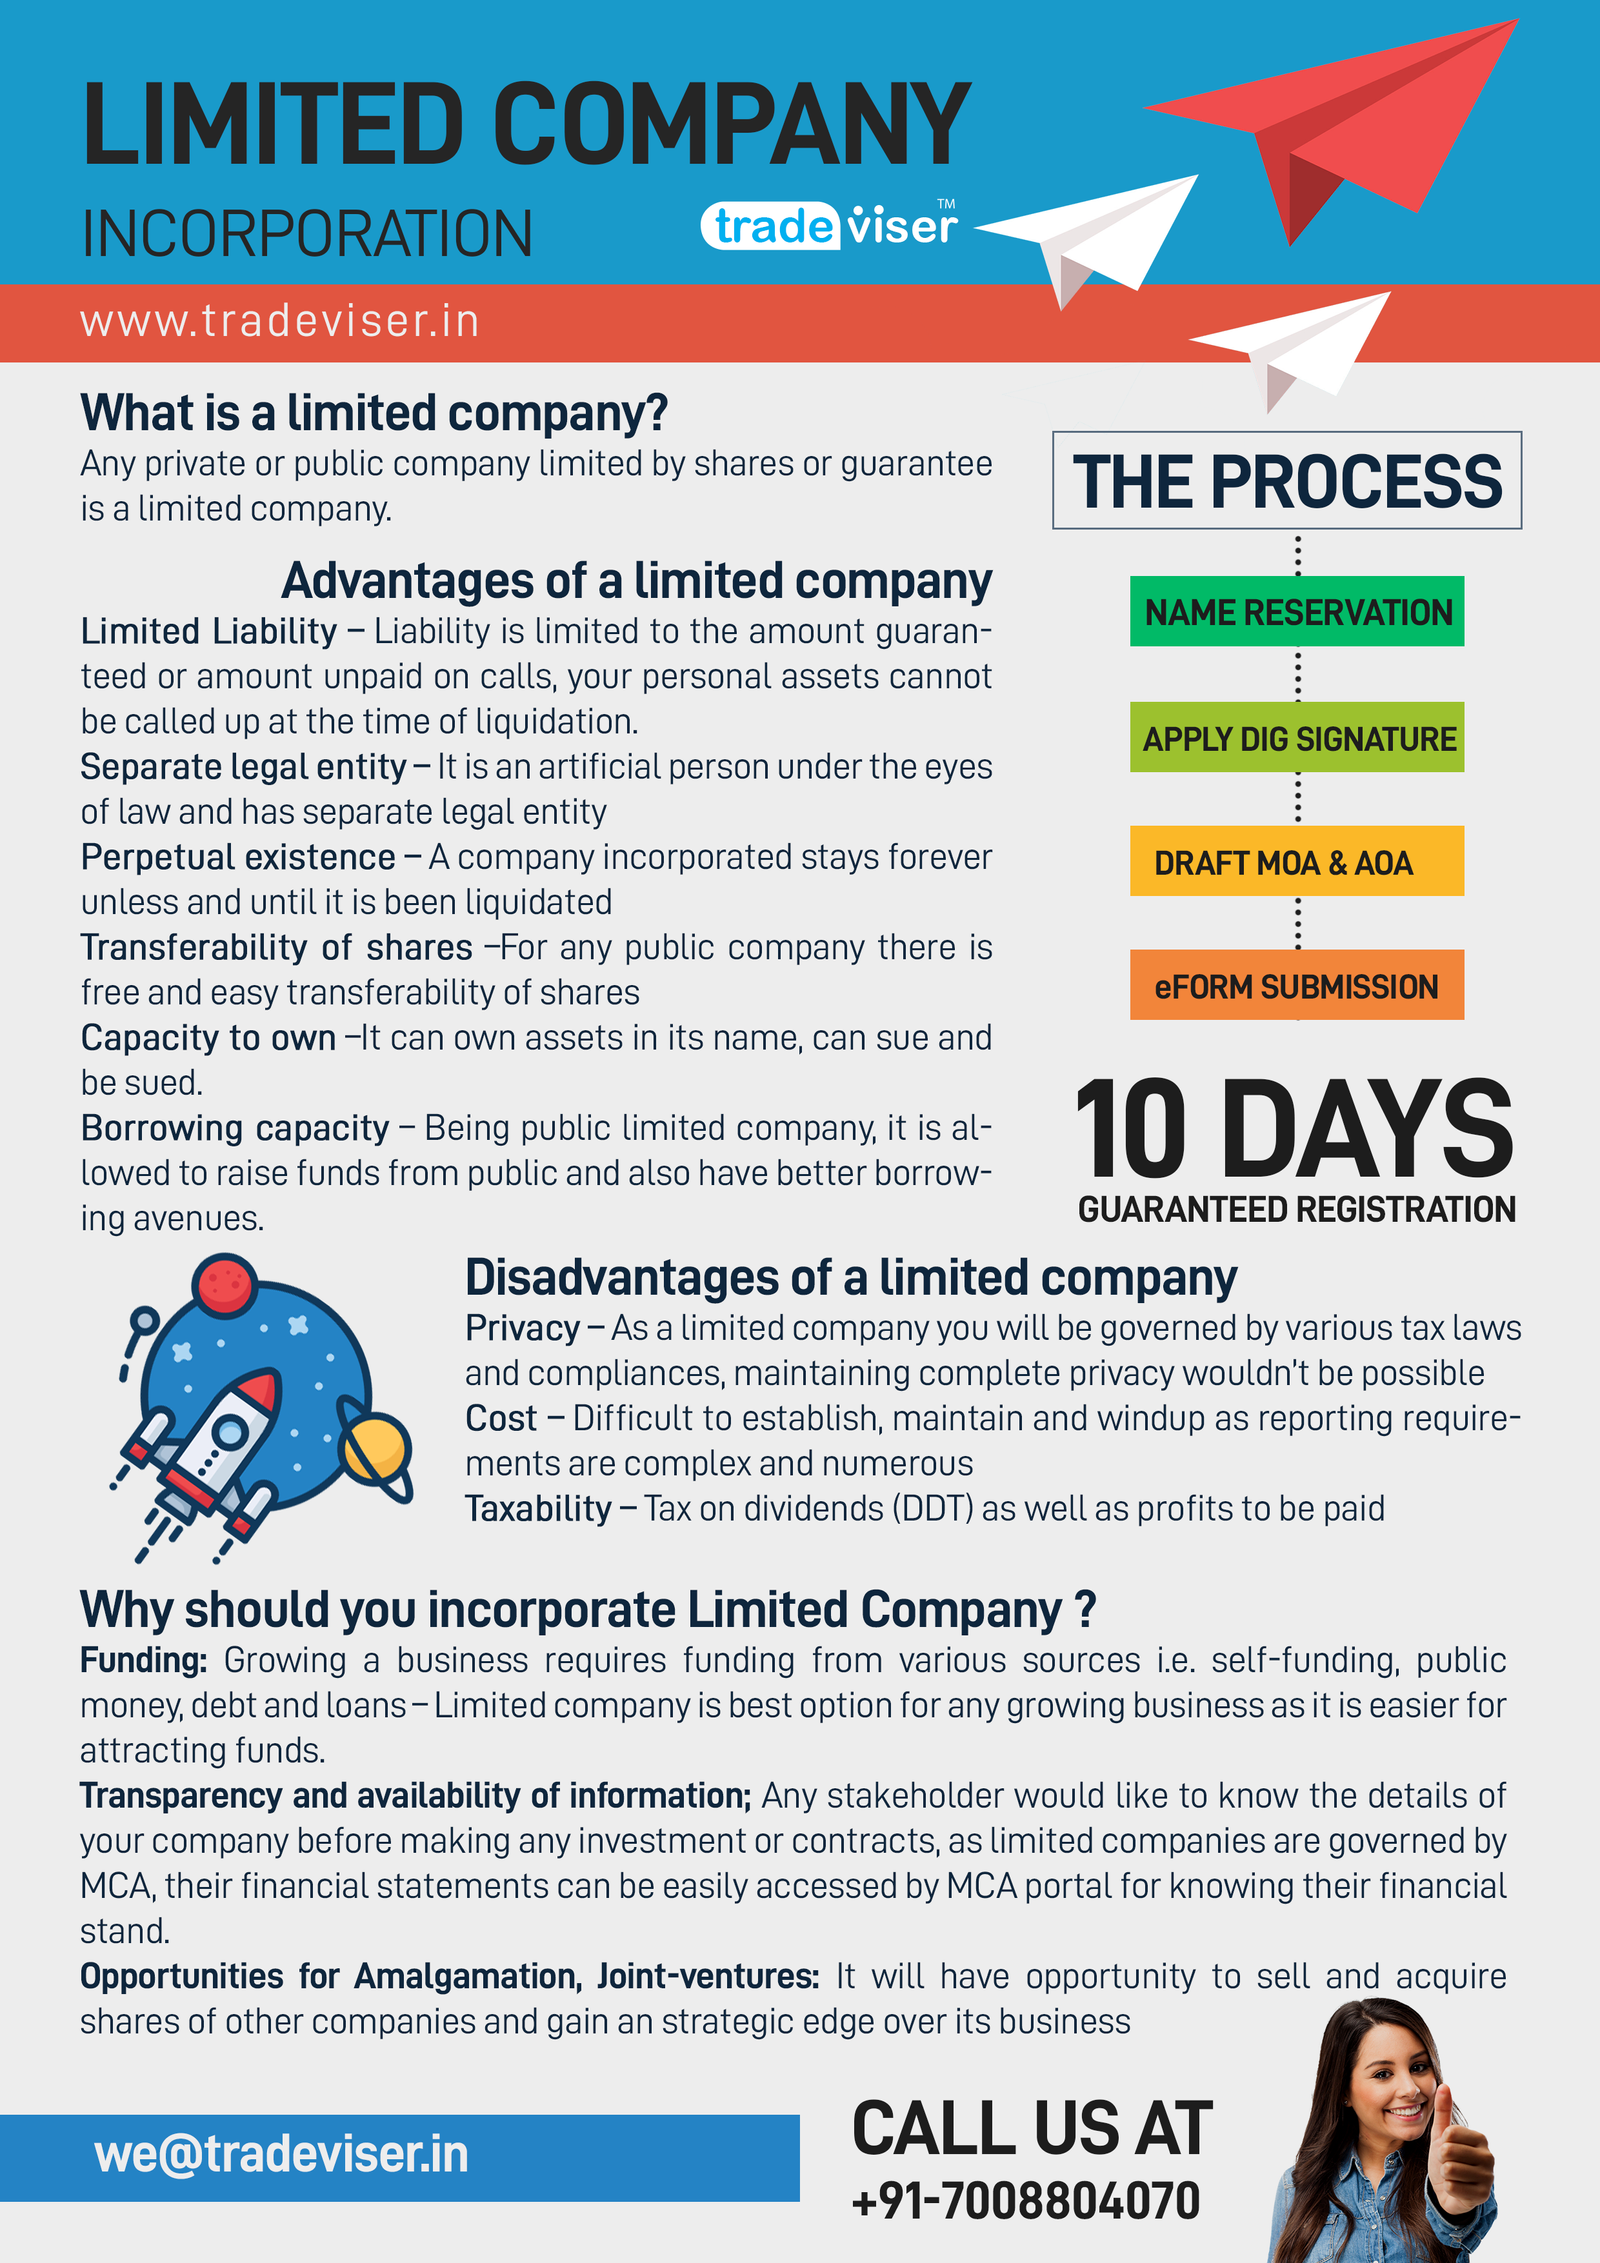 Registration of a Limited Company, Registration of a Limited Company